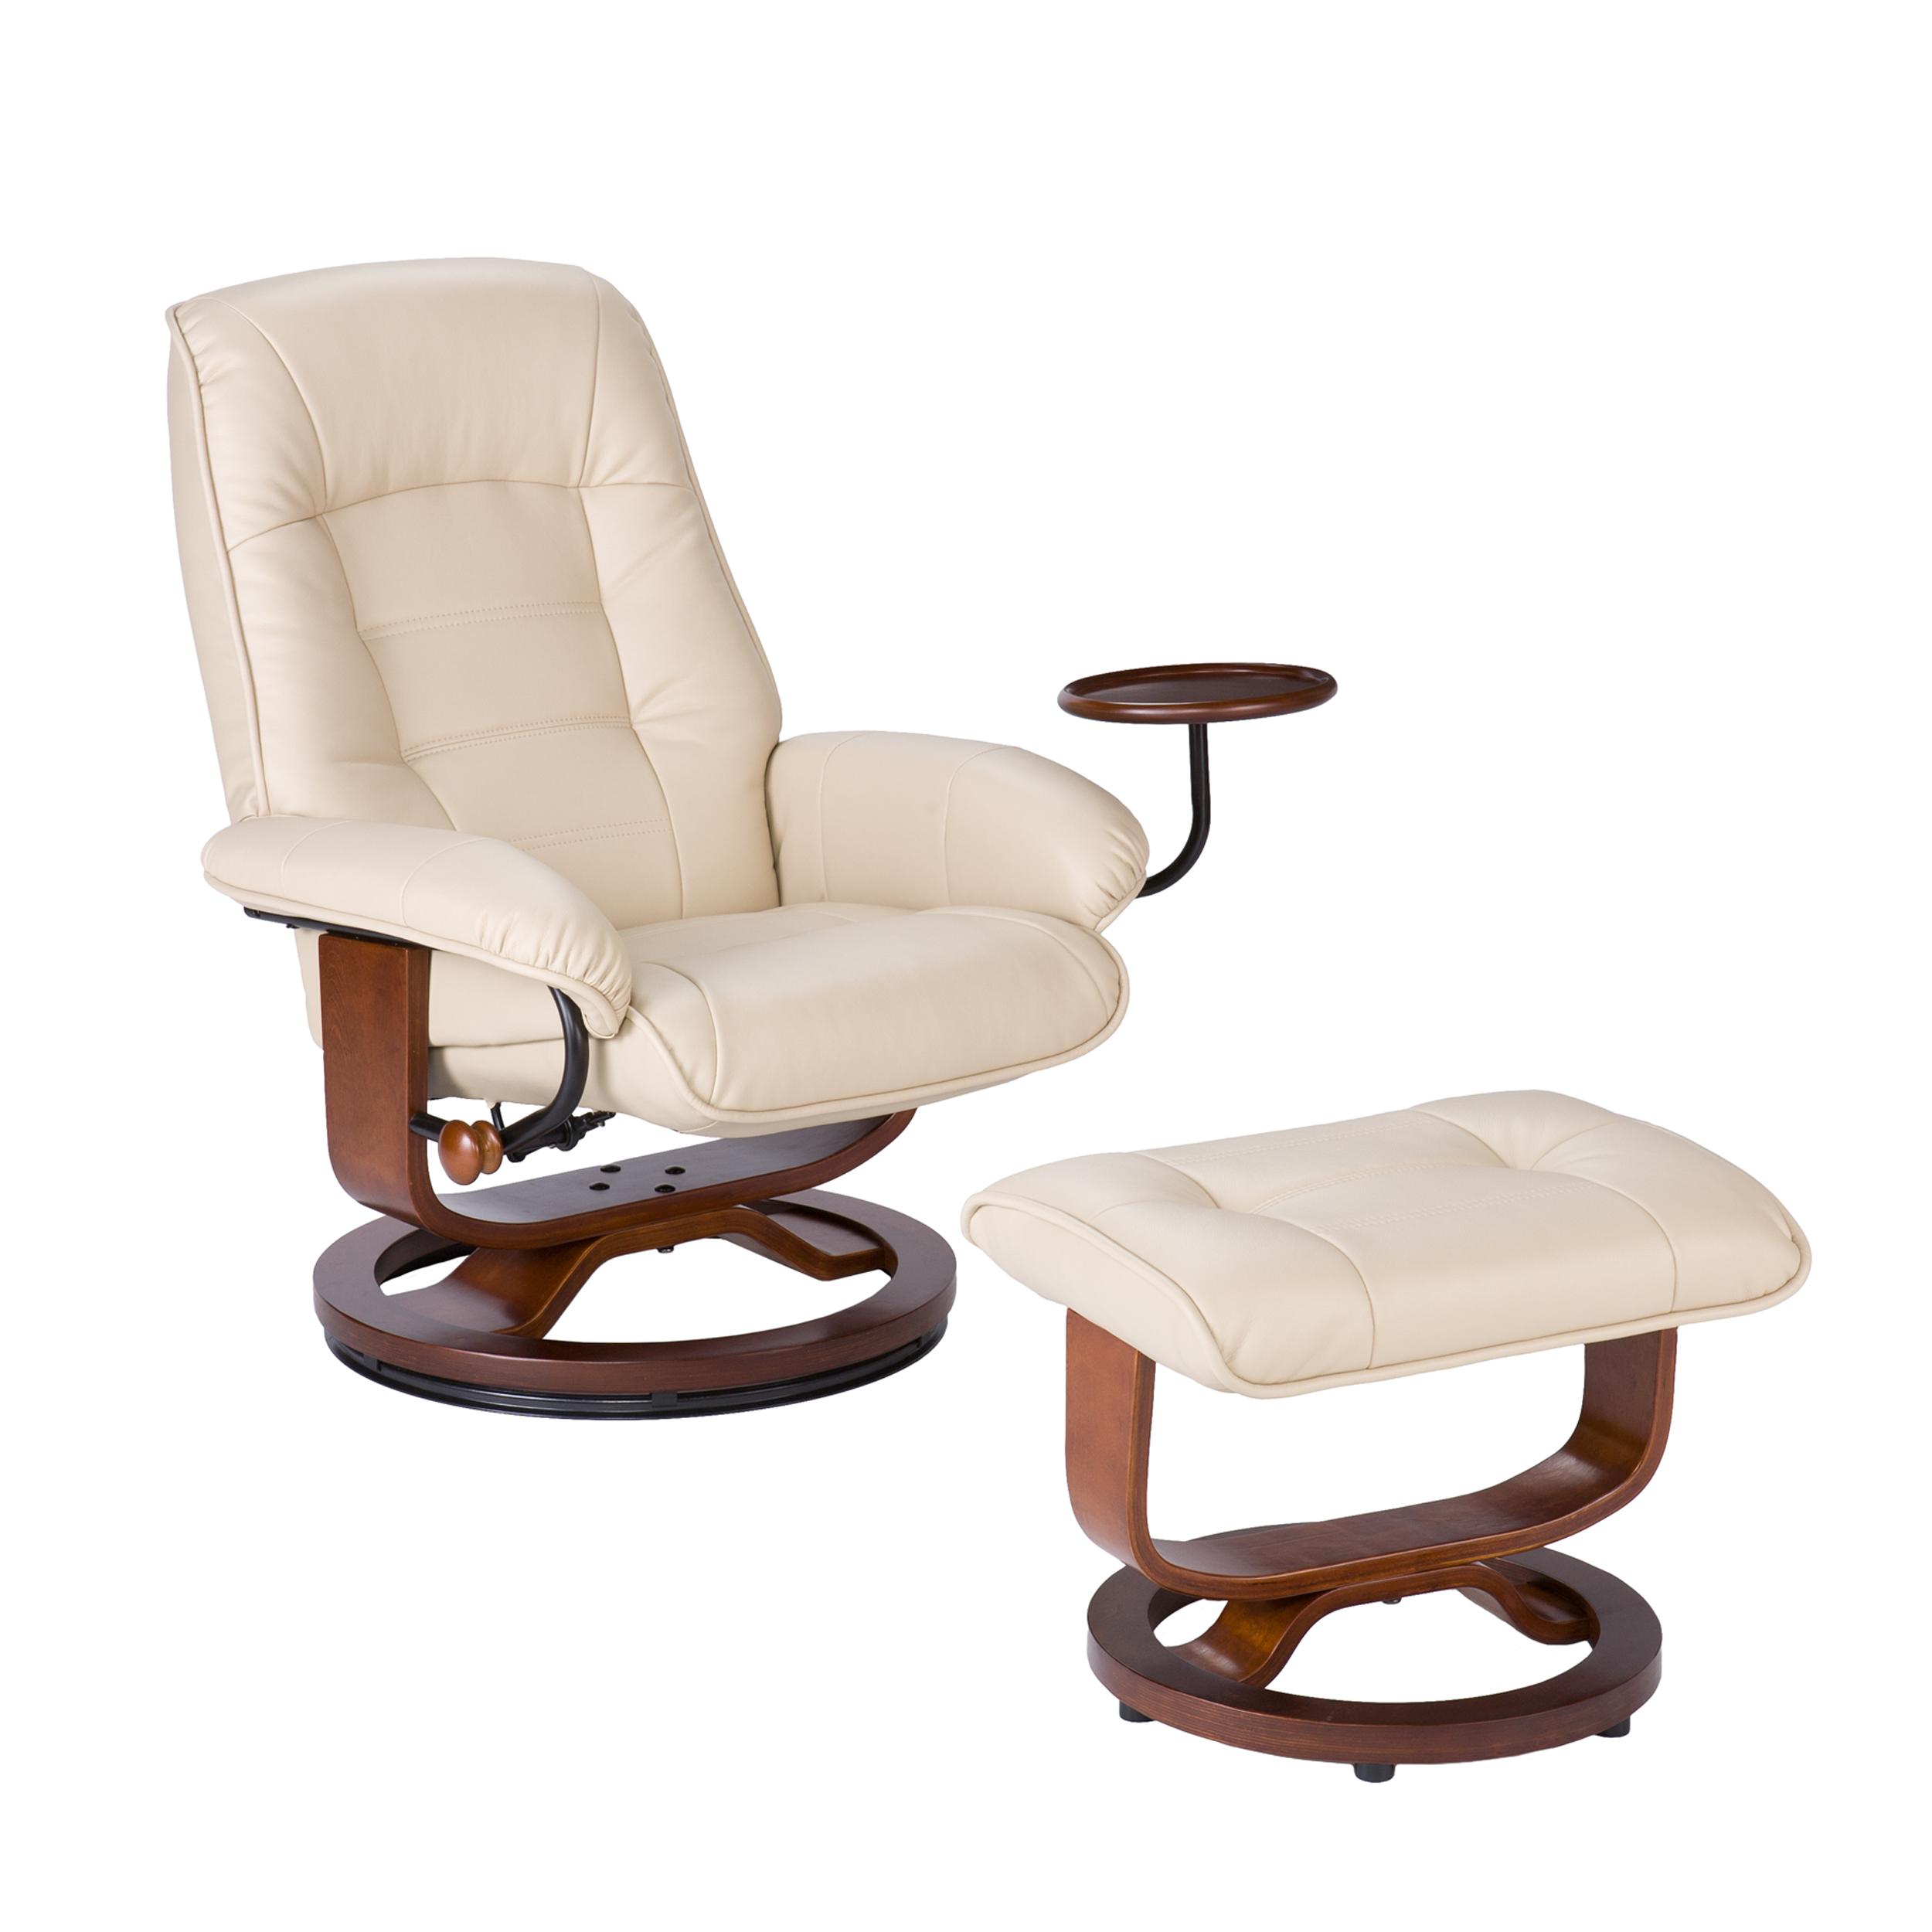 leather chair with ottoman ced c d fbabe jpg cb